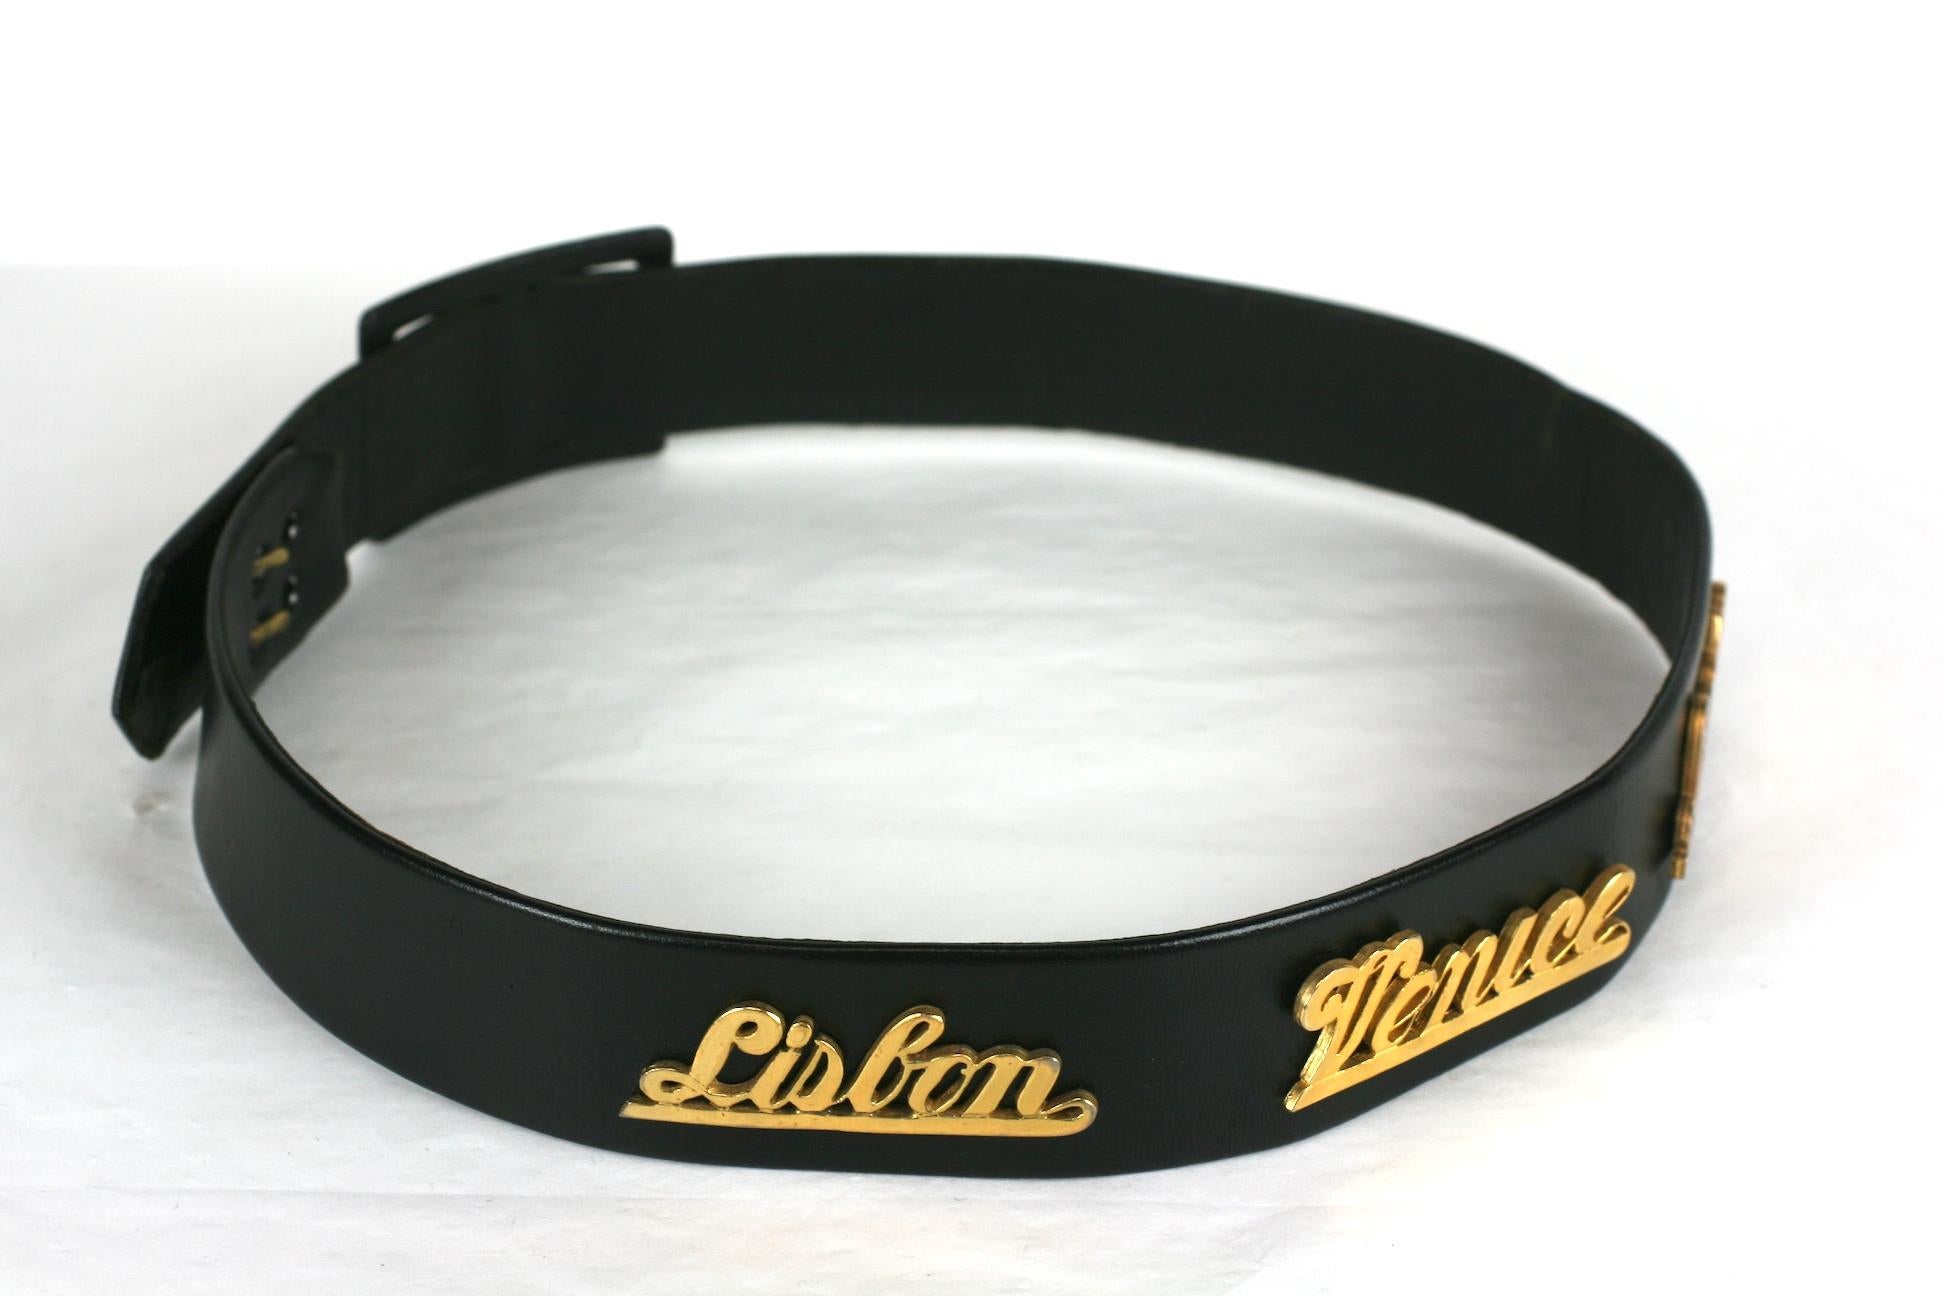 Novelty travel motif belt 1950s of black kid leather, with gilt filigree wording of European cities including Lisbon, Venice, London, Rome, and Paris .  1950's USA. 
24